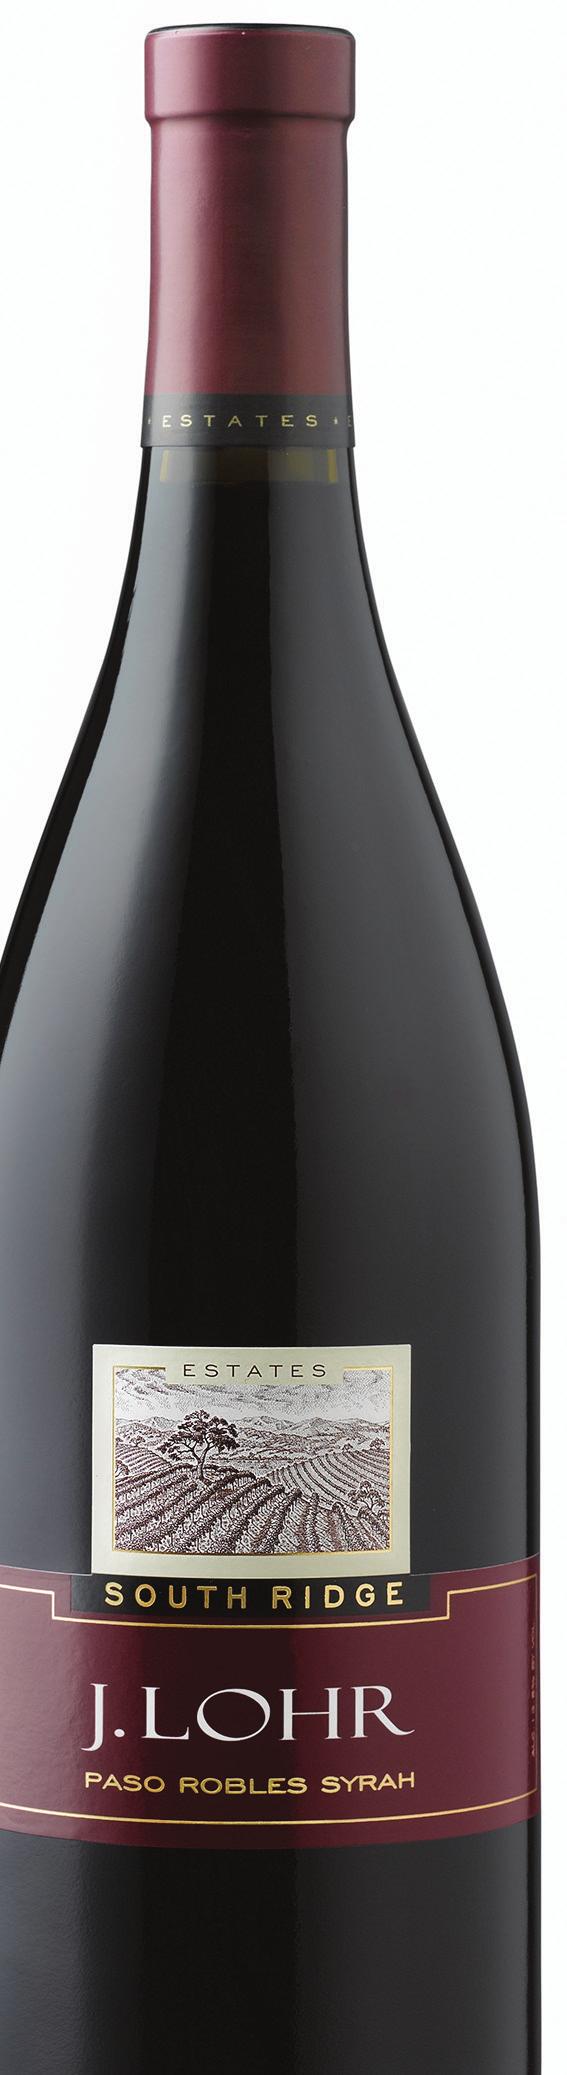 2013 J. LOHR ESTATES SOUTH RIDGE SYRAH paso robles Have you ever noticed how good things often come in threes?